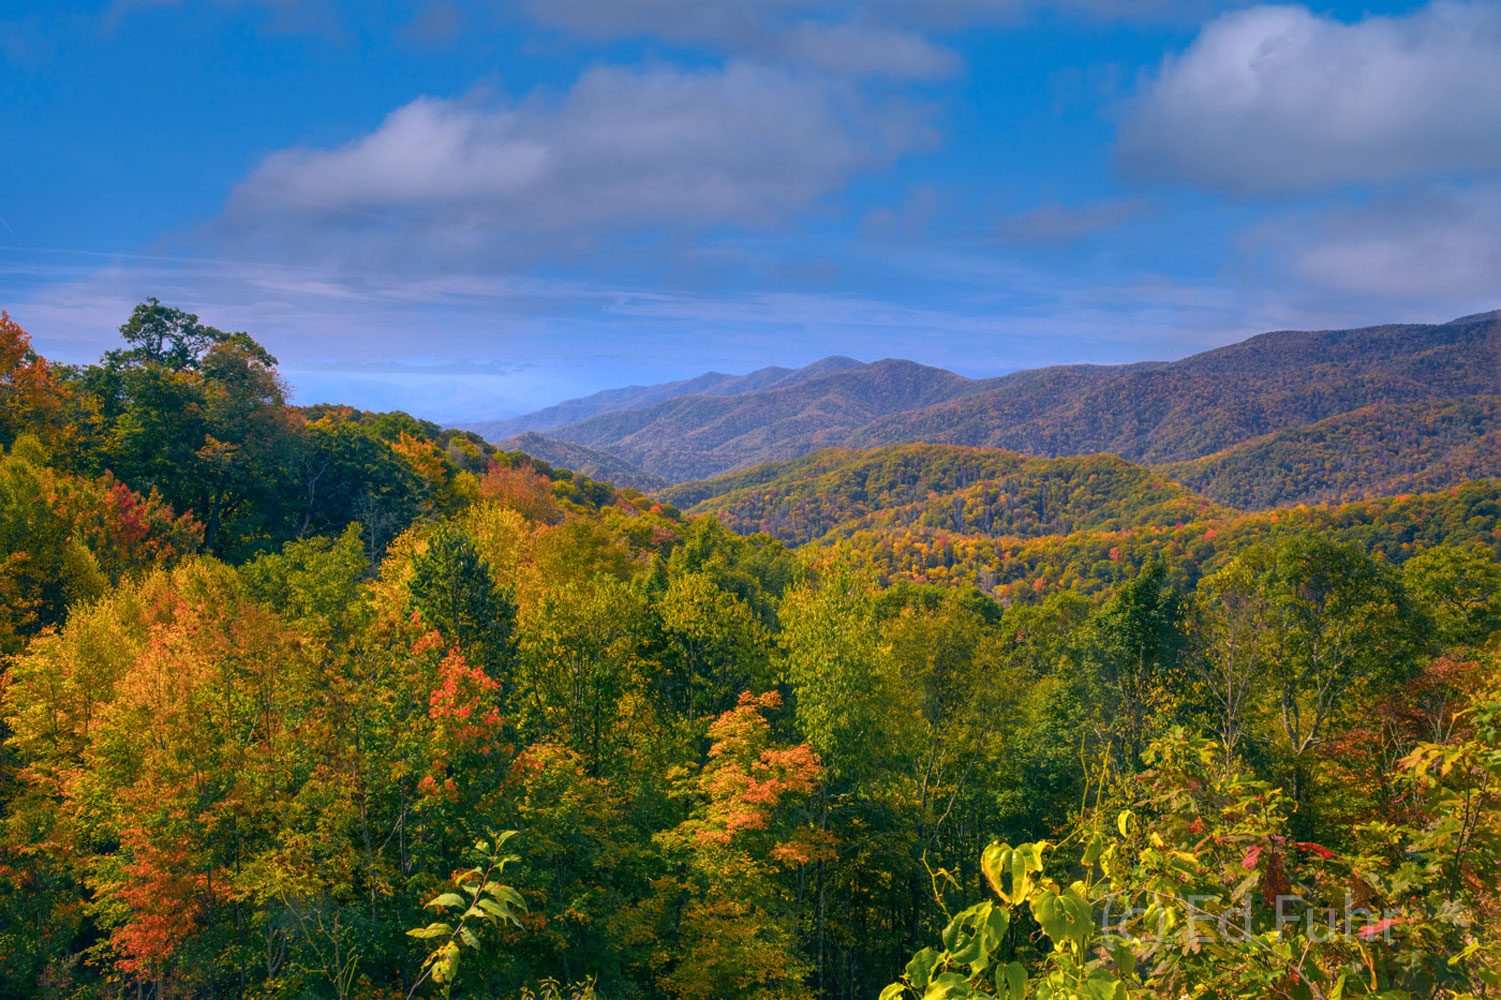 Autumn's colorful parades gradually flows down the high mountain slopes in the northeast corners of the Great Smoky Mountains...